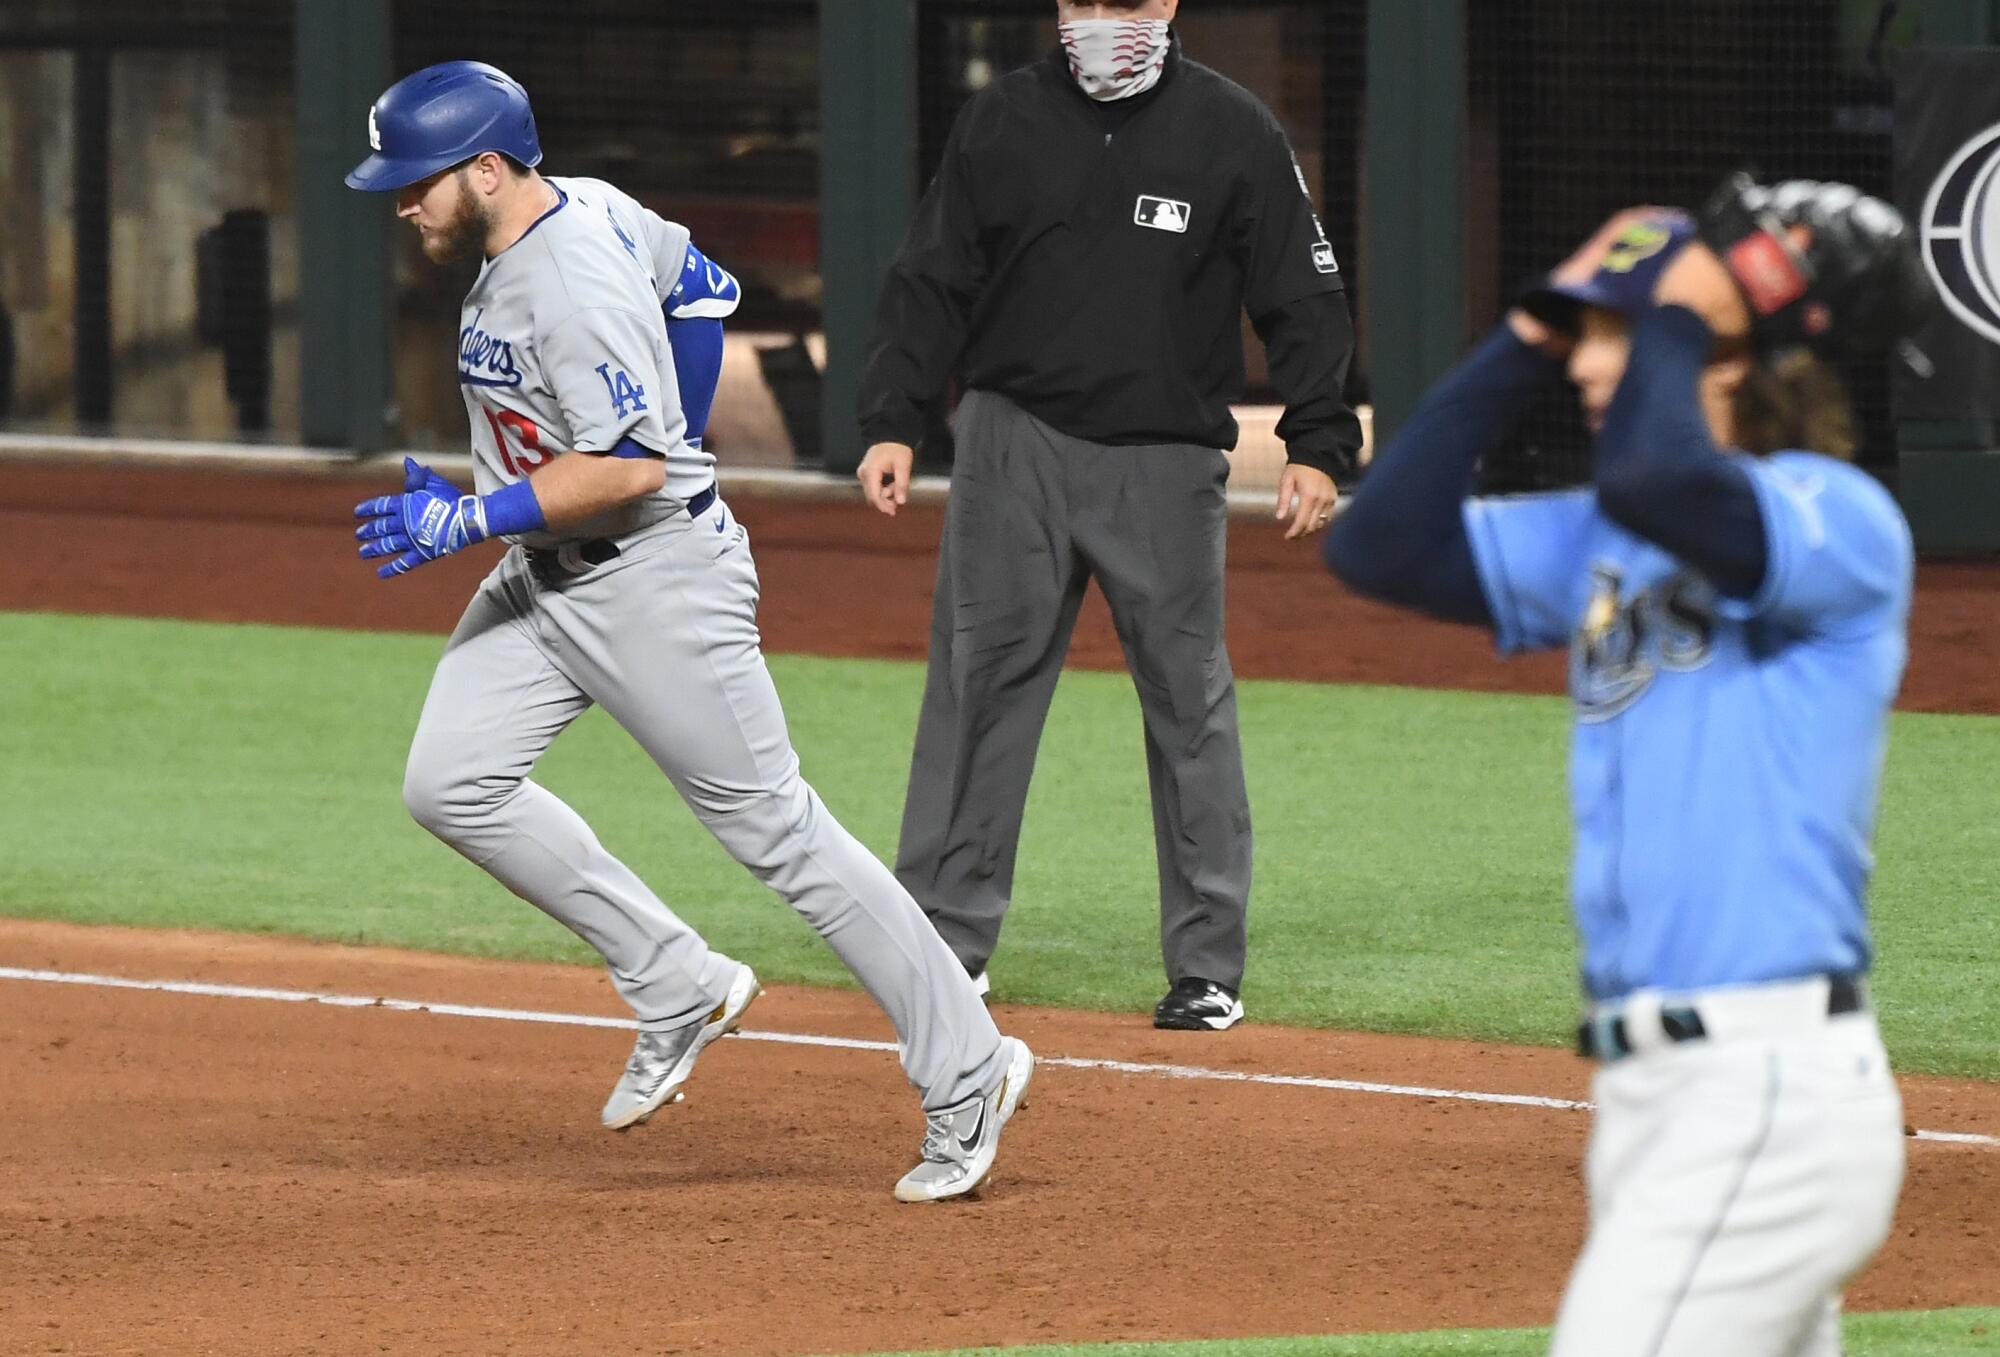 Max Muncy rounds the bases after his fifth-inning solo home run off Rays pitcher Tyler Glasnow.